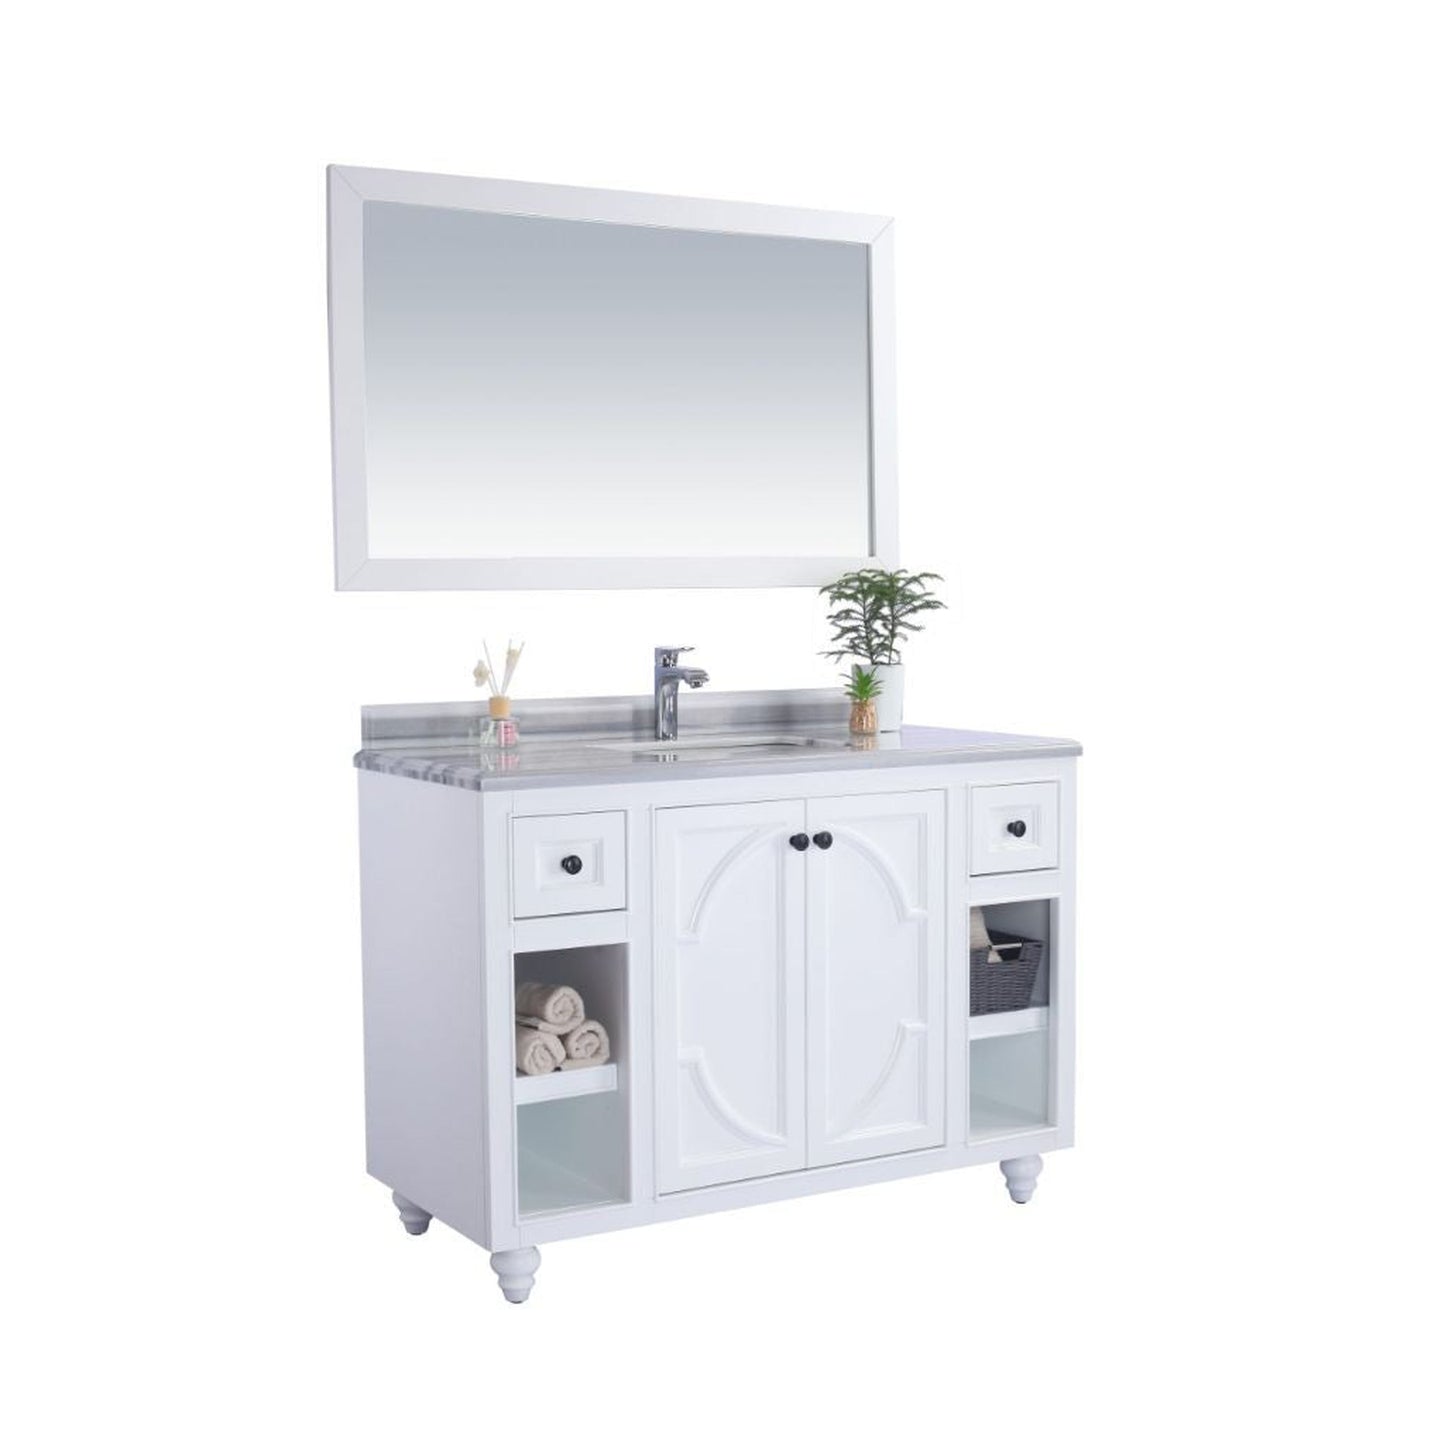 Laviva Odyssey 48" White Vanity Base and White Stripes Marble Countertop With Rectangular Ceramic Sink